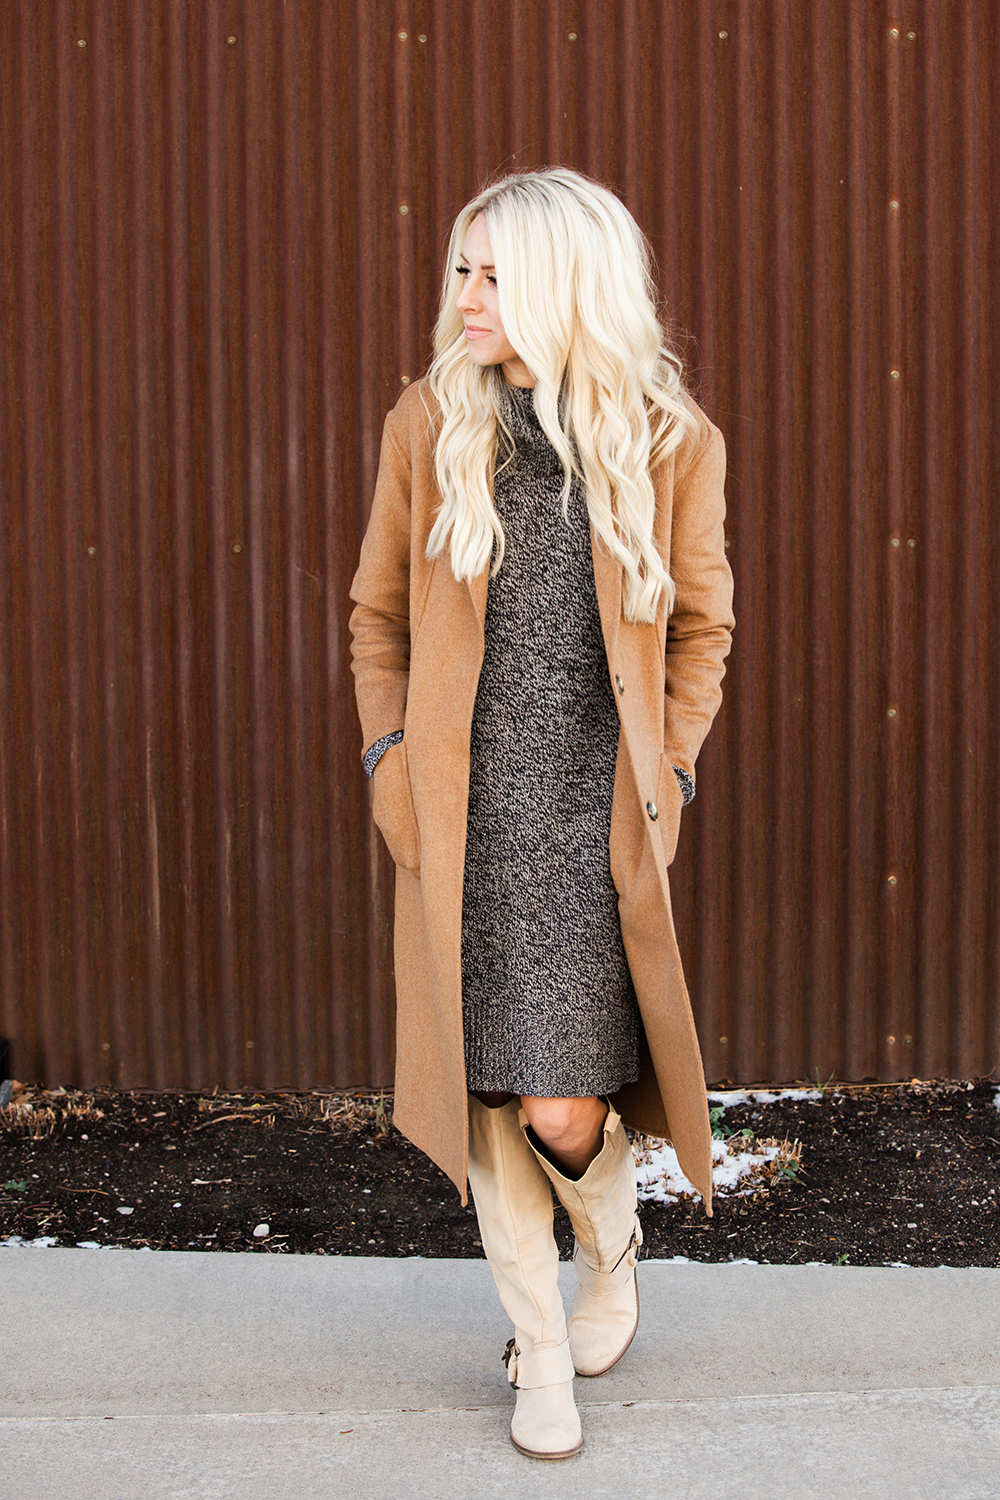 Kailee-Wright-brown Coat